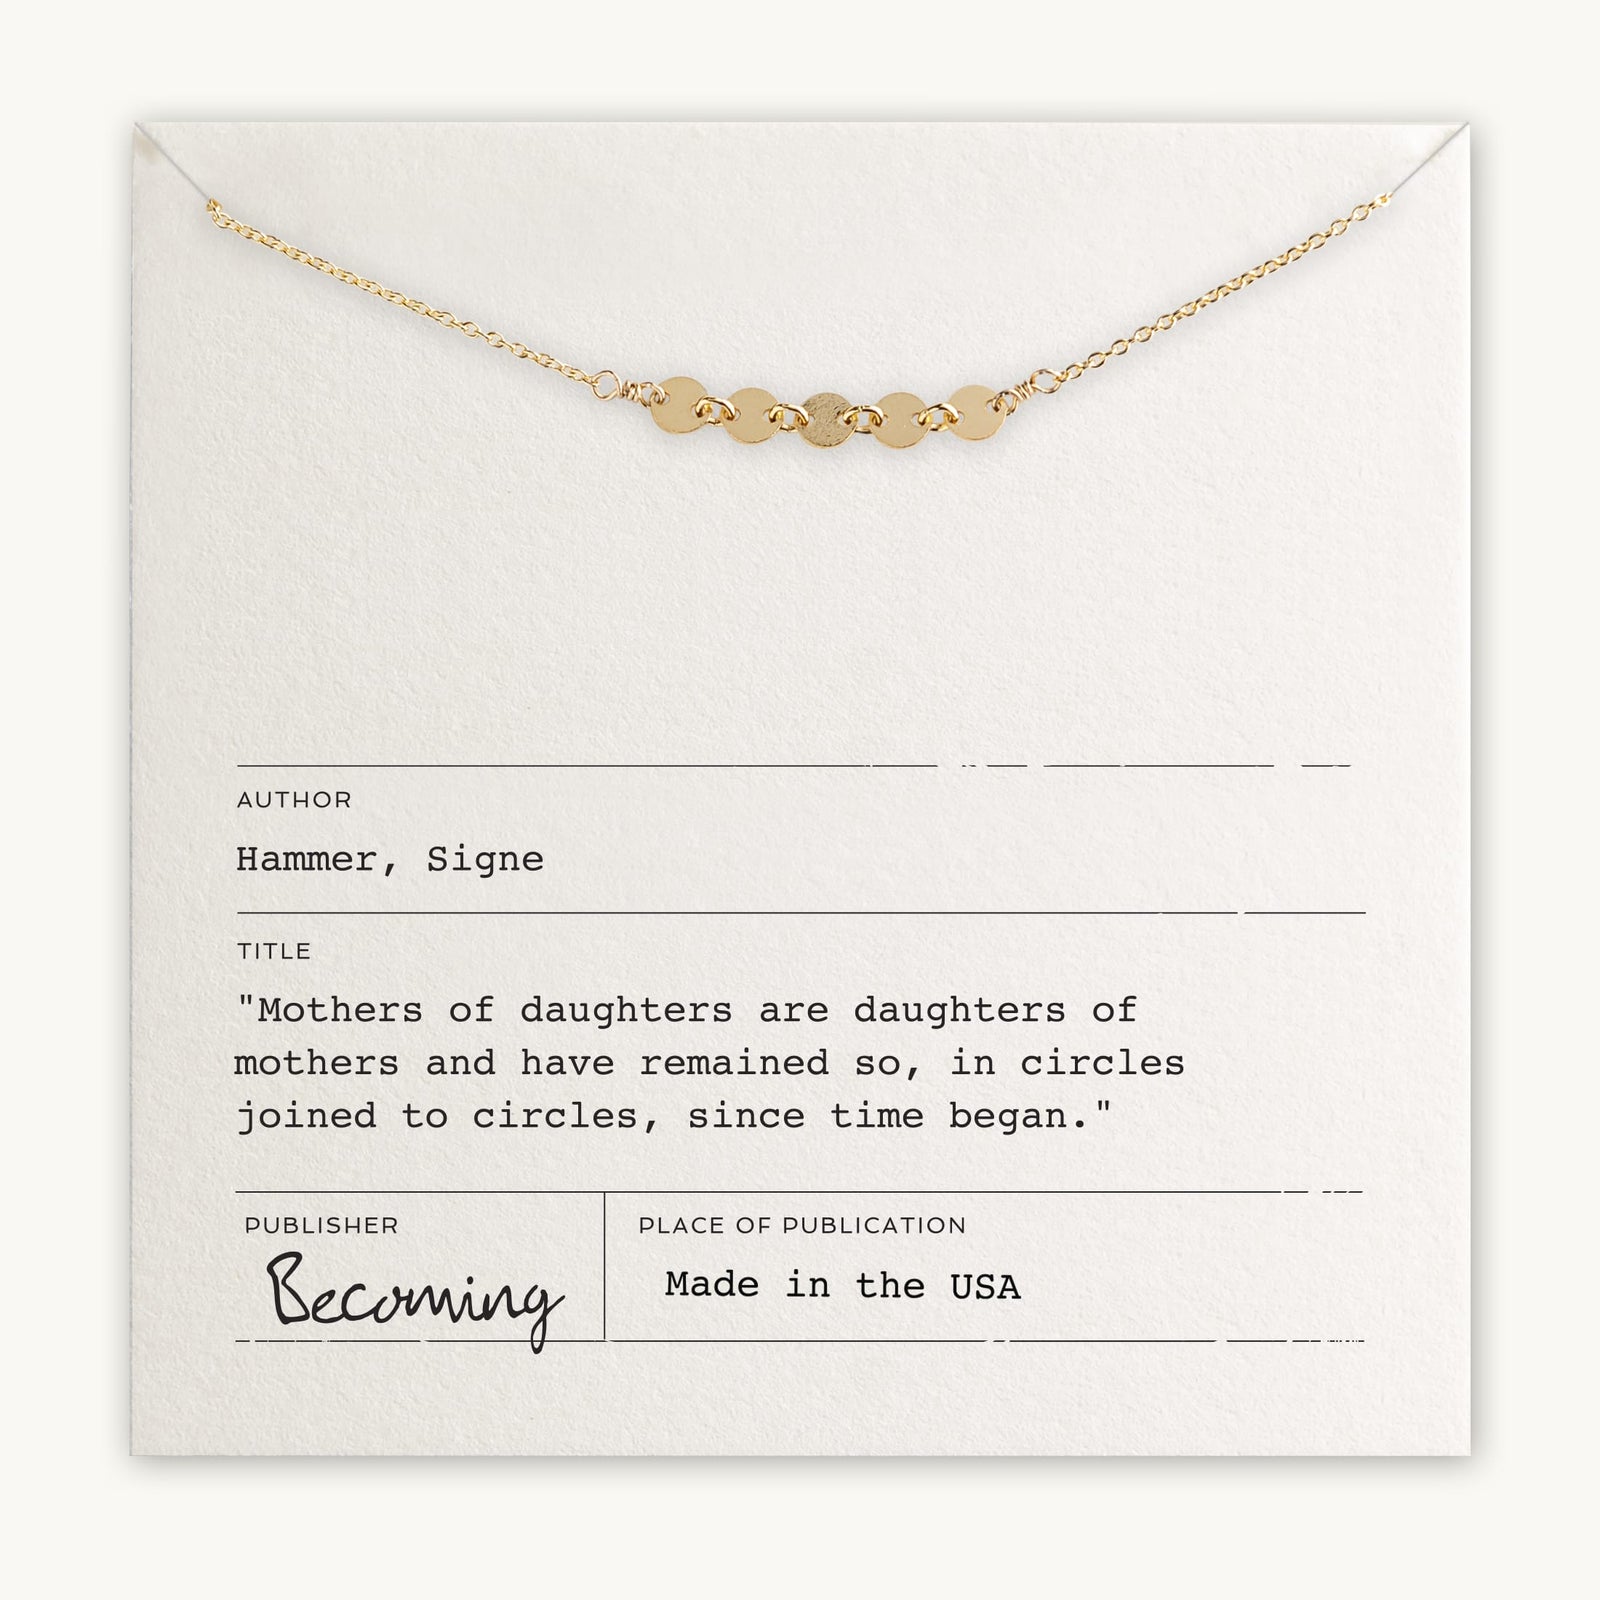 Becoming Jewelry's Mothers & Daughters Necklace with joined circles charm displayed above an inspirational quote about mothers and daughters, labeled as made in the USA.